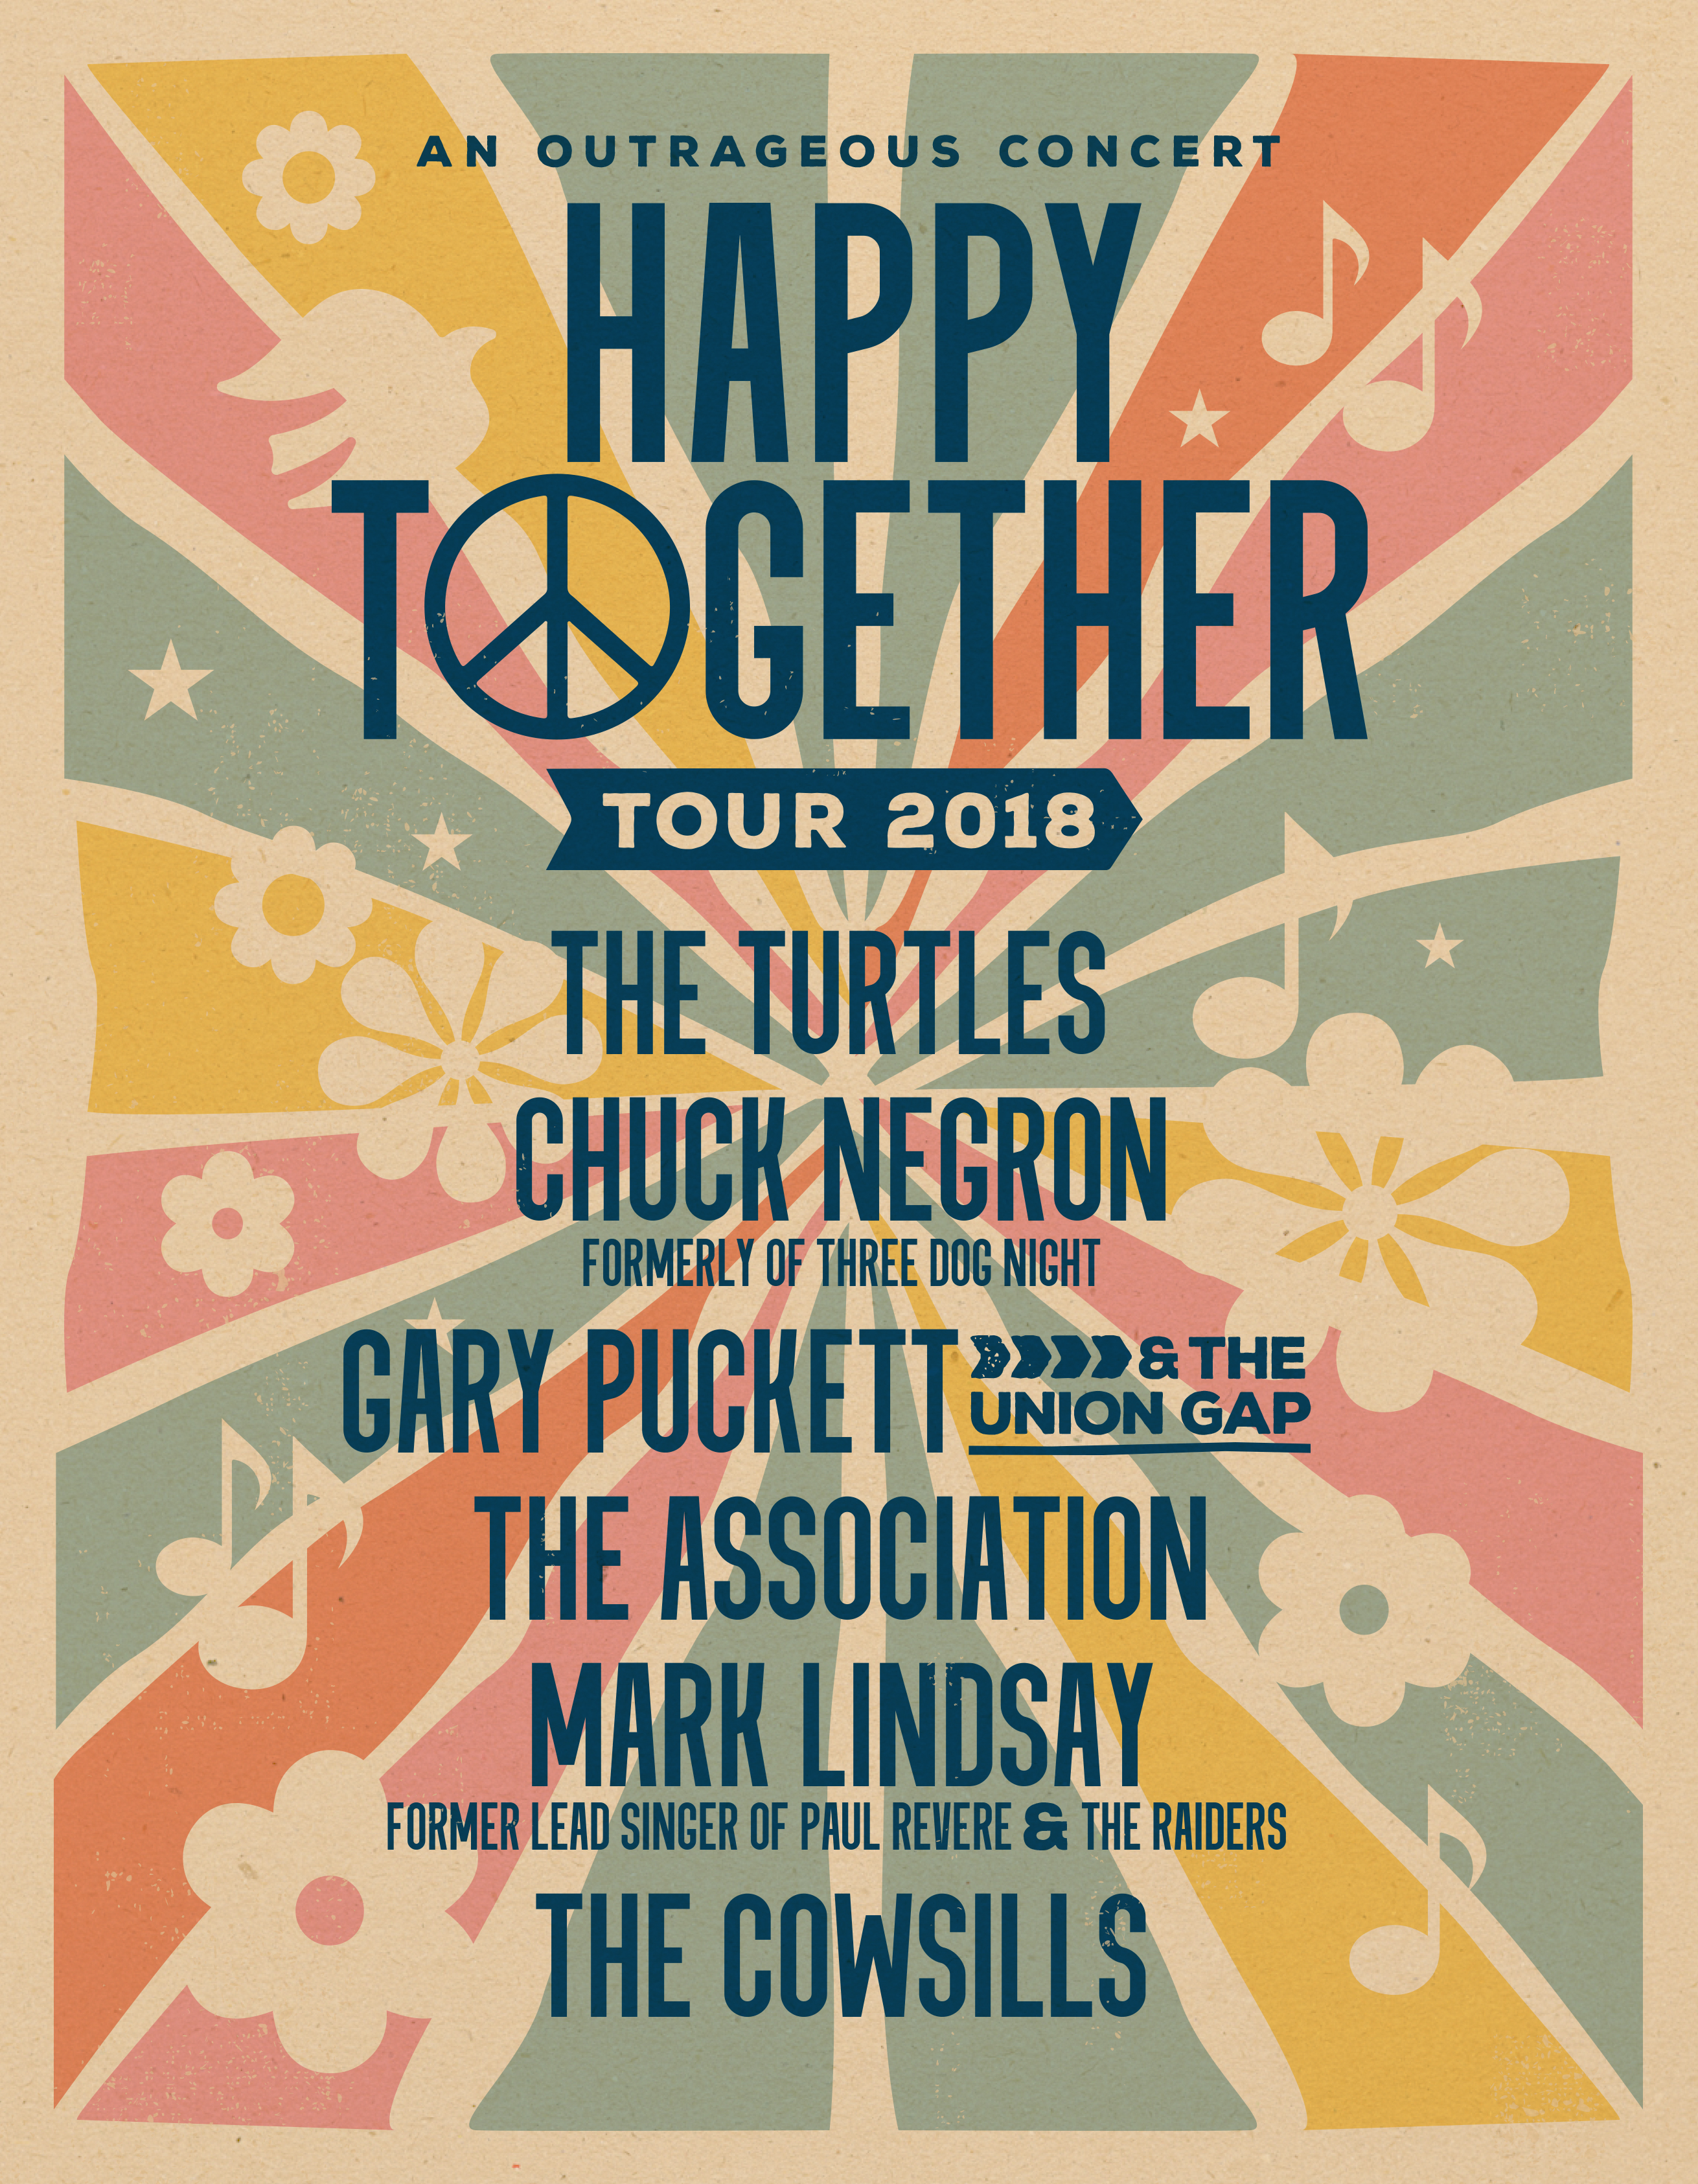 Happy Together 2018 Tour, Lineup Announced Best Classic Bands